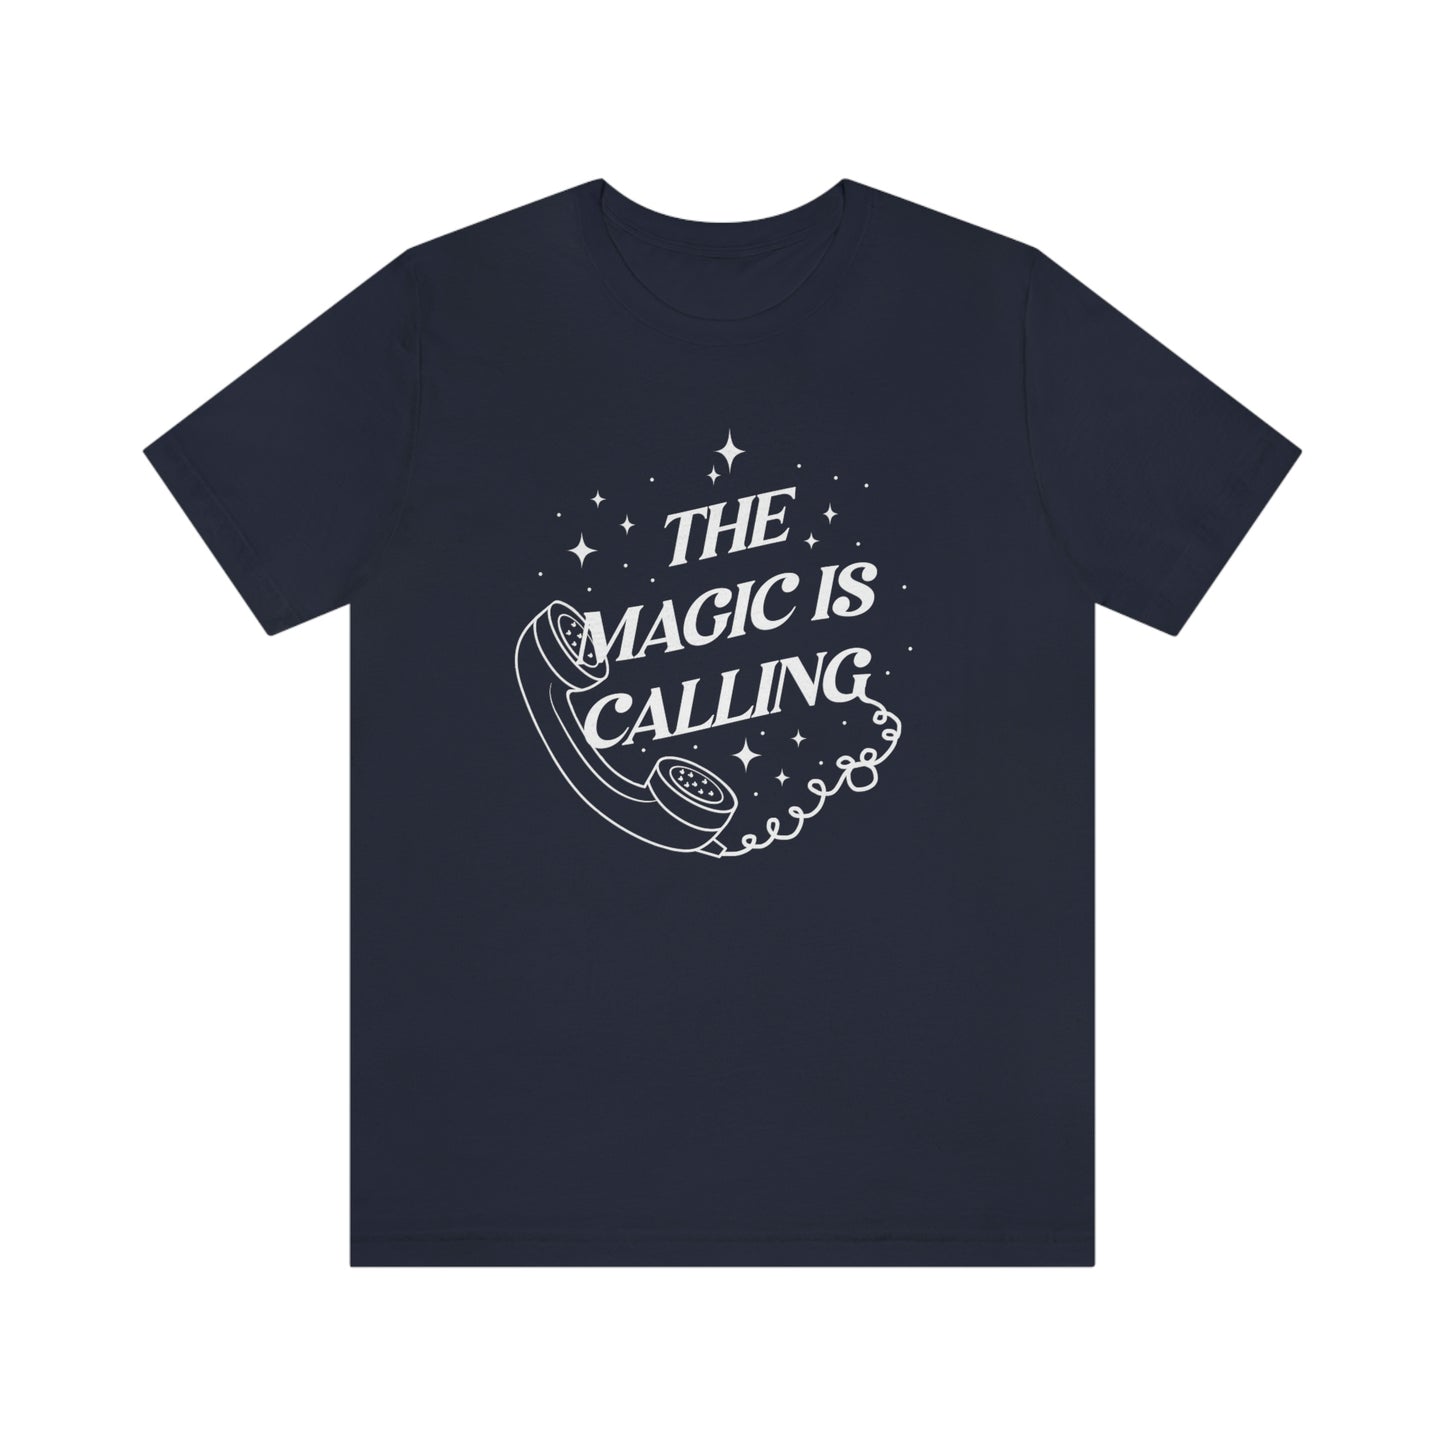 Magic is Calling Double Sided - Adult Shirt